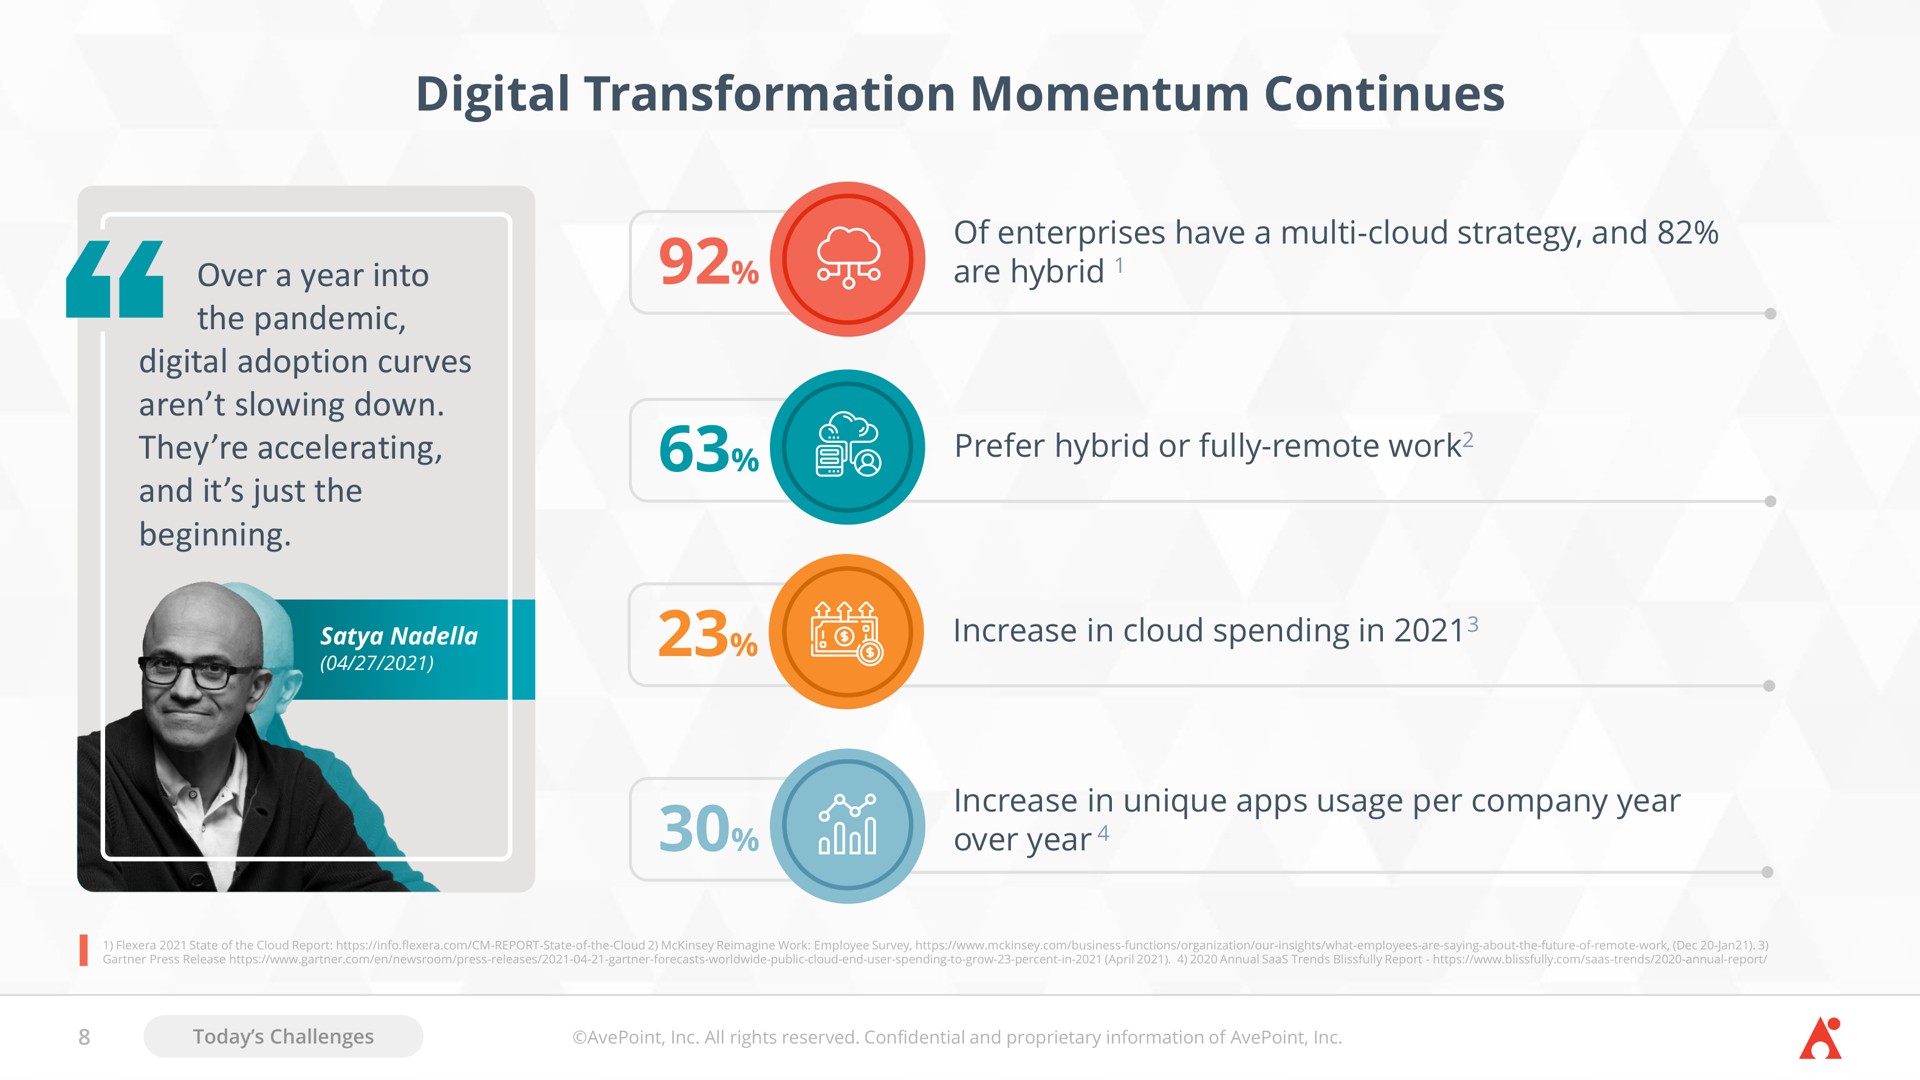 digital transformation momentum continues of enterprises have a cloud strategy and are hybrid prefer hybrid or fully remote work increase in cloud spending in increase in unique usage per company year over year the pandemic slowing down they accelerating and it just the | AvePoint